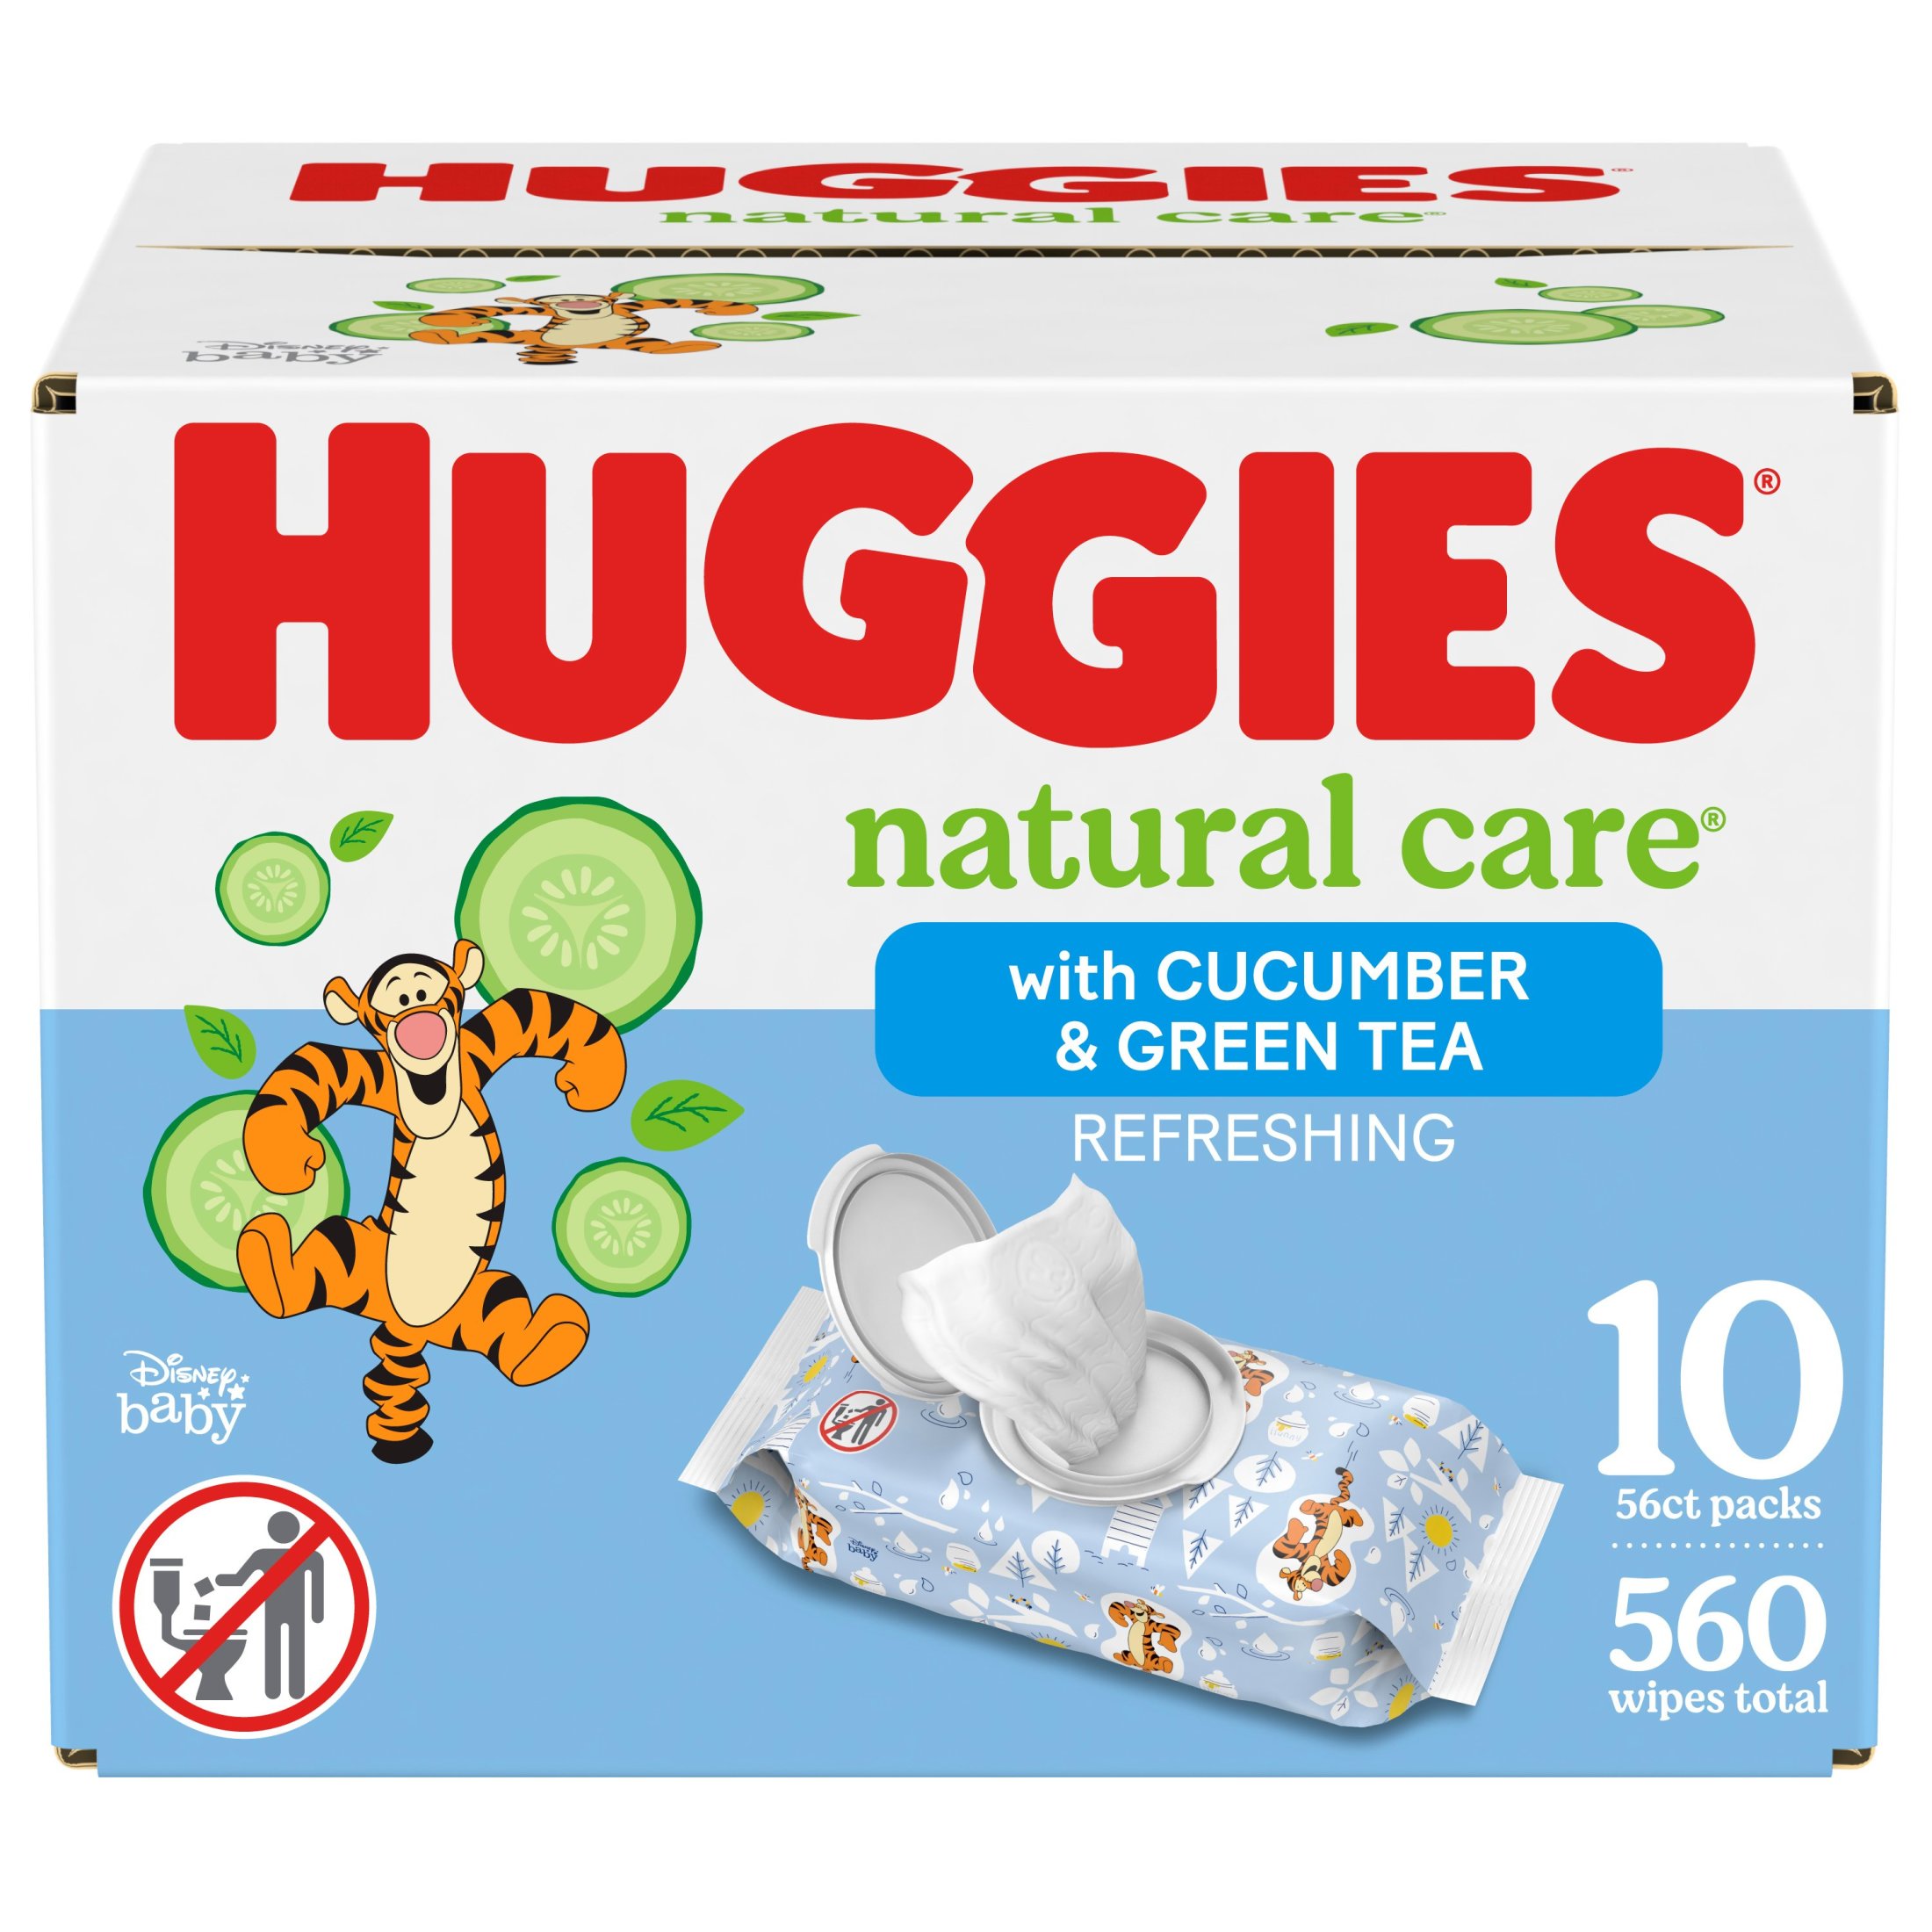 Huggies Natural Care Refreshing Baby Wipes, Scented, 10 Pack, 560 Total Ct (Select for More Options) - image 3 of 11